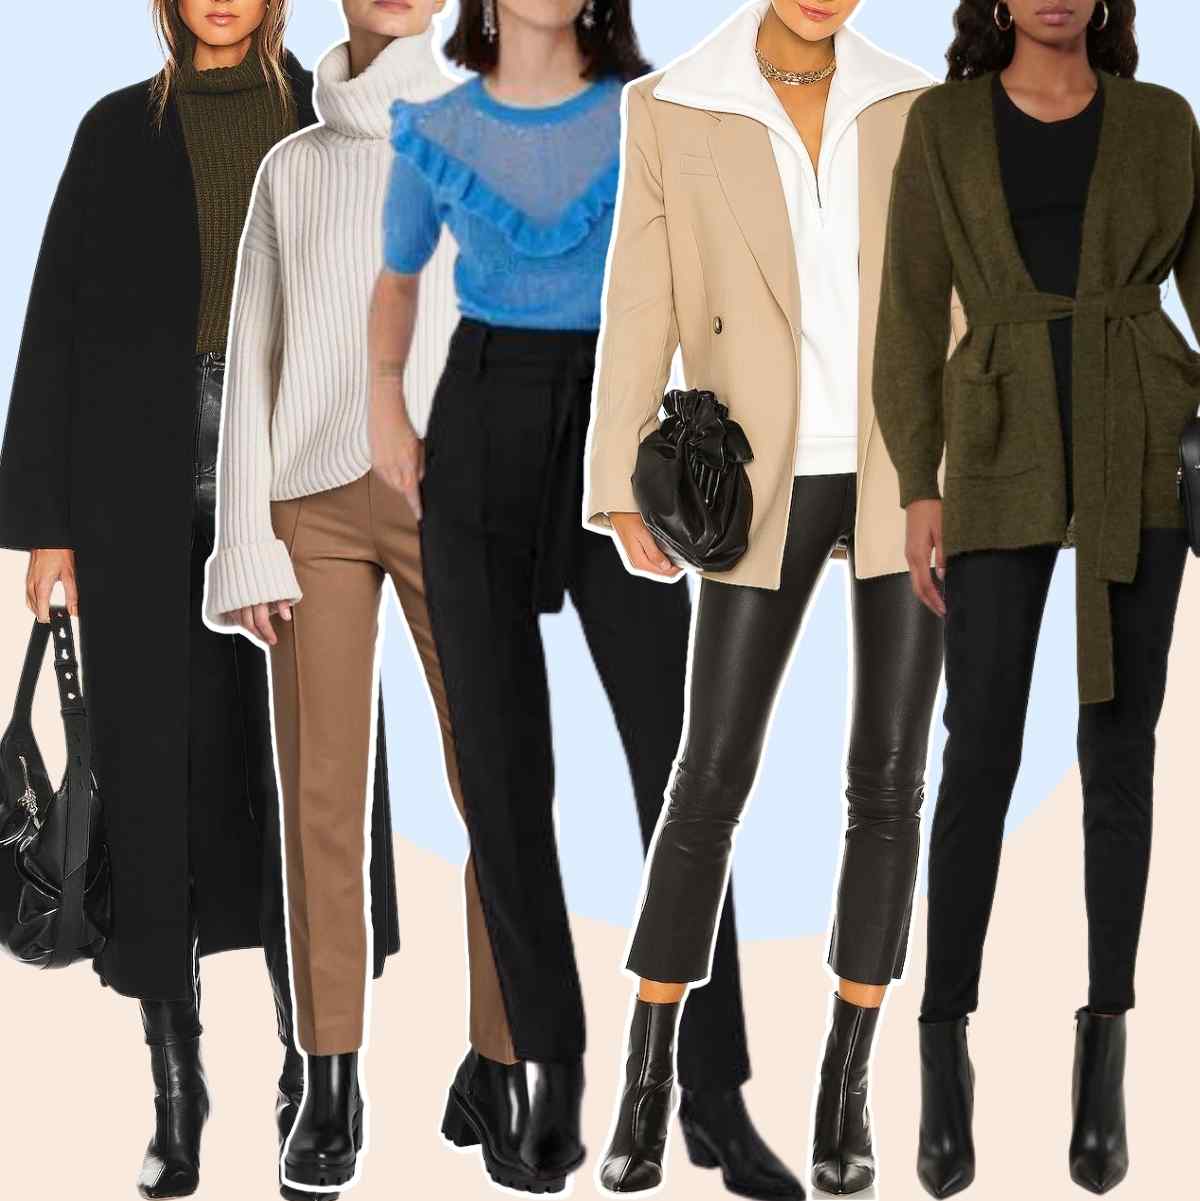 Collage of 5 women wearing different black ankle boots with dress pants that are skinny fit.